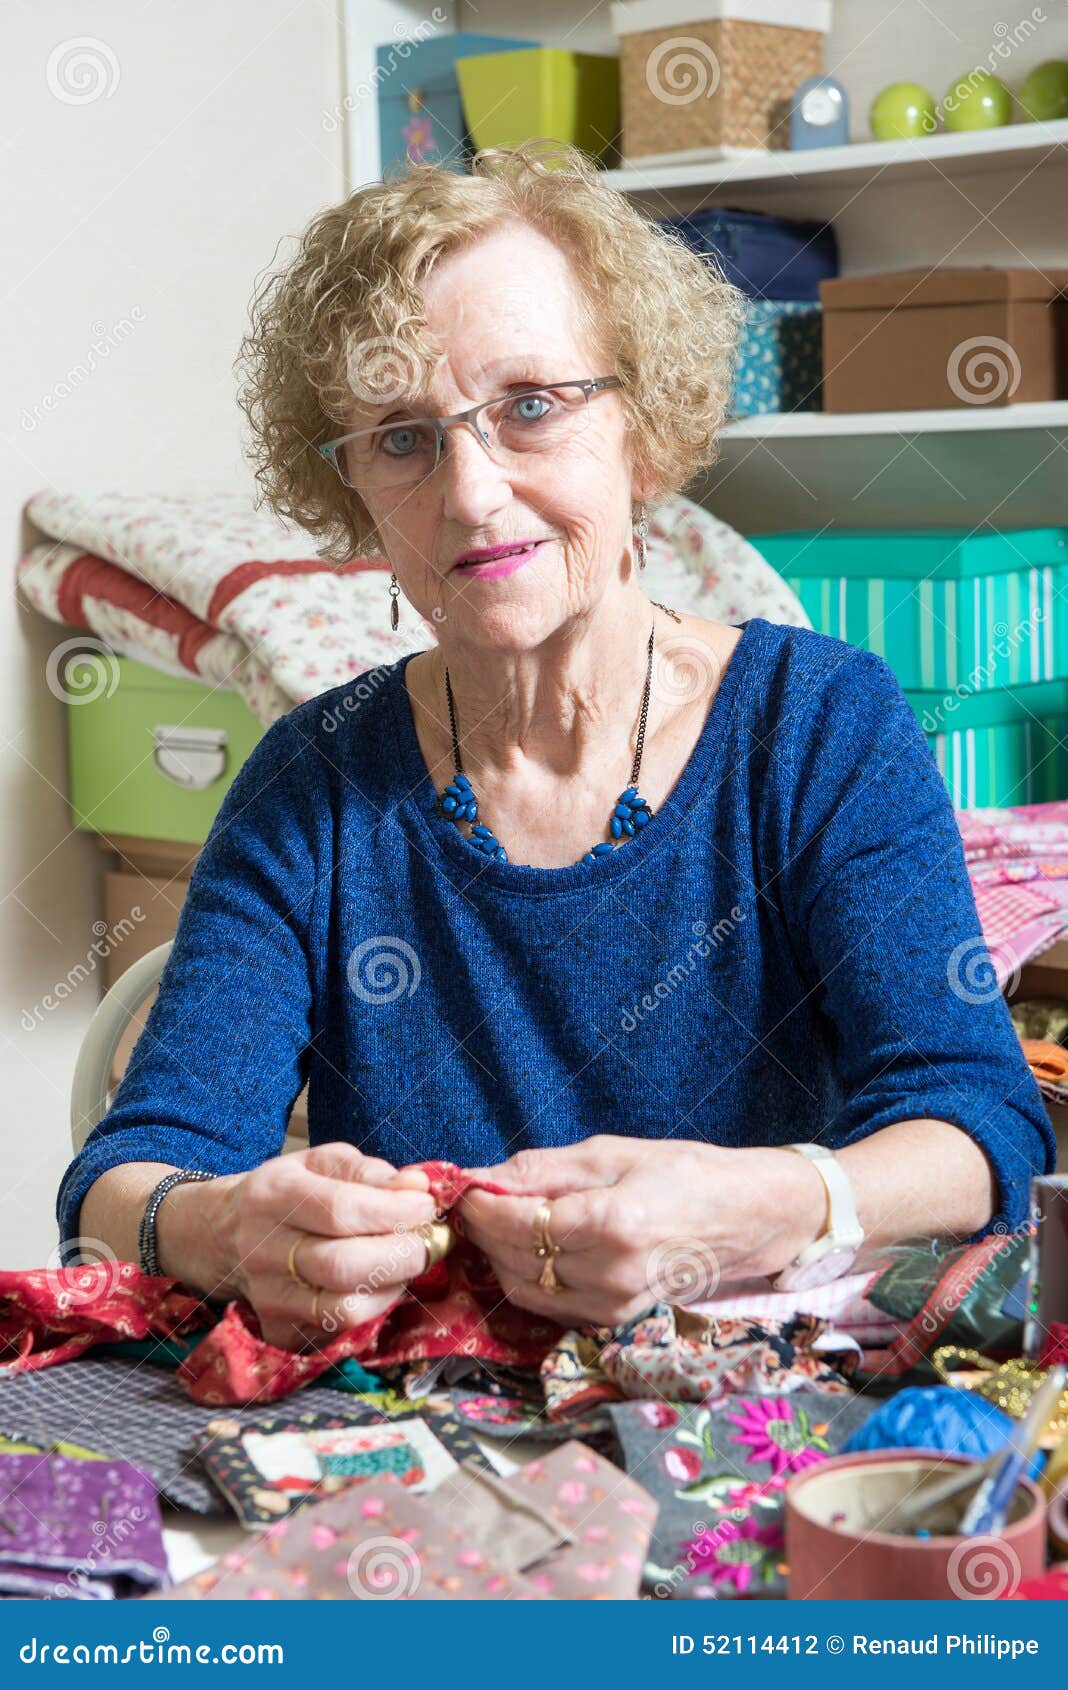 Dressmaker Working on Her Patchwork Stock Photo - Image of needle ...